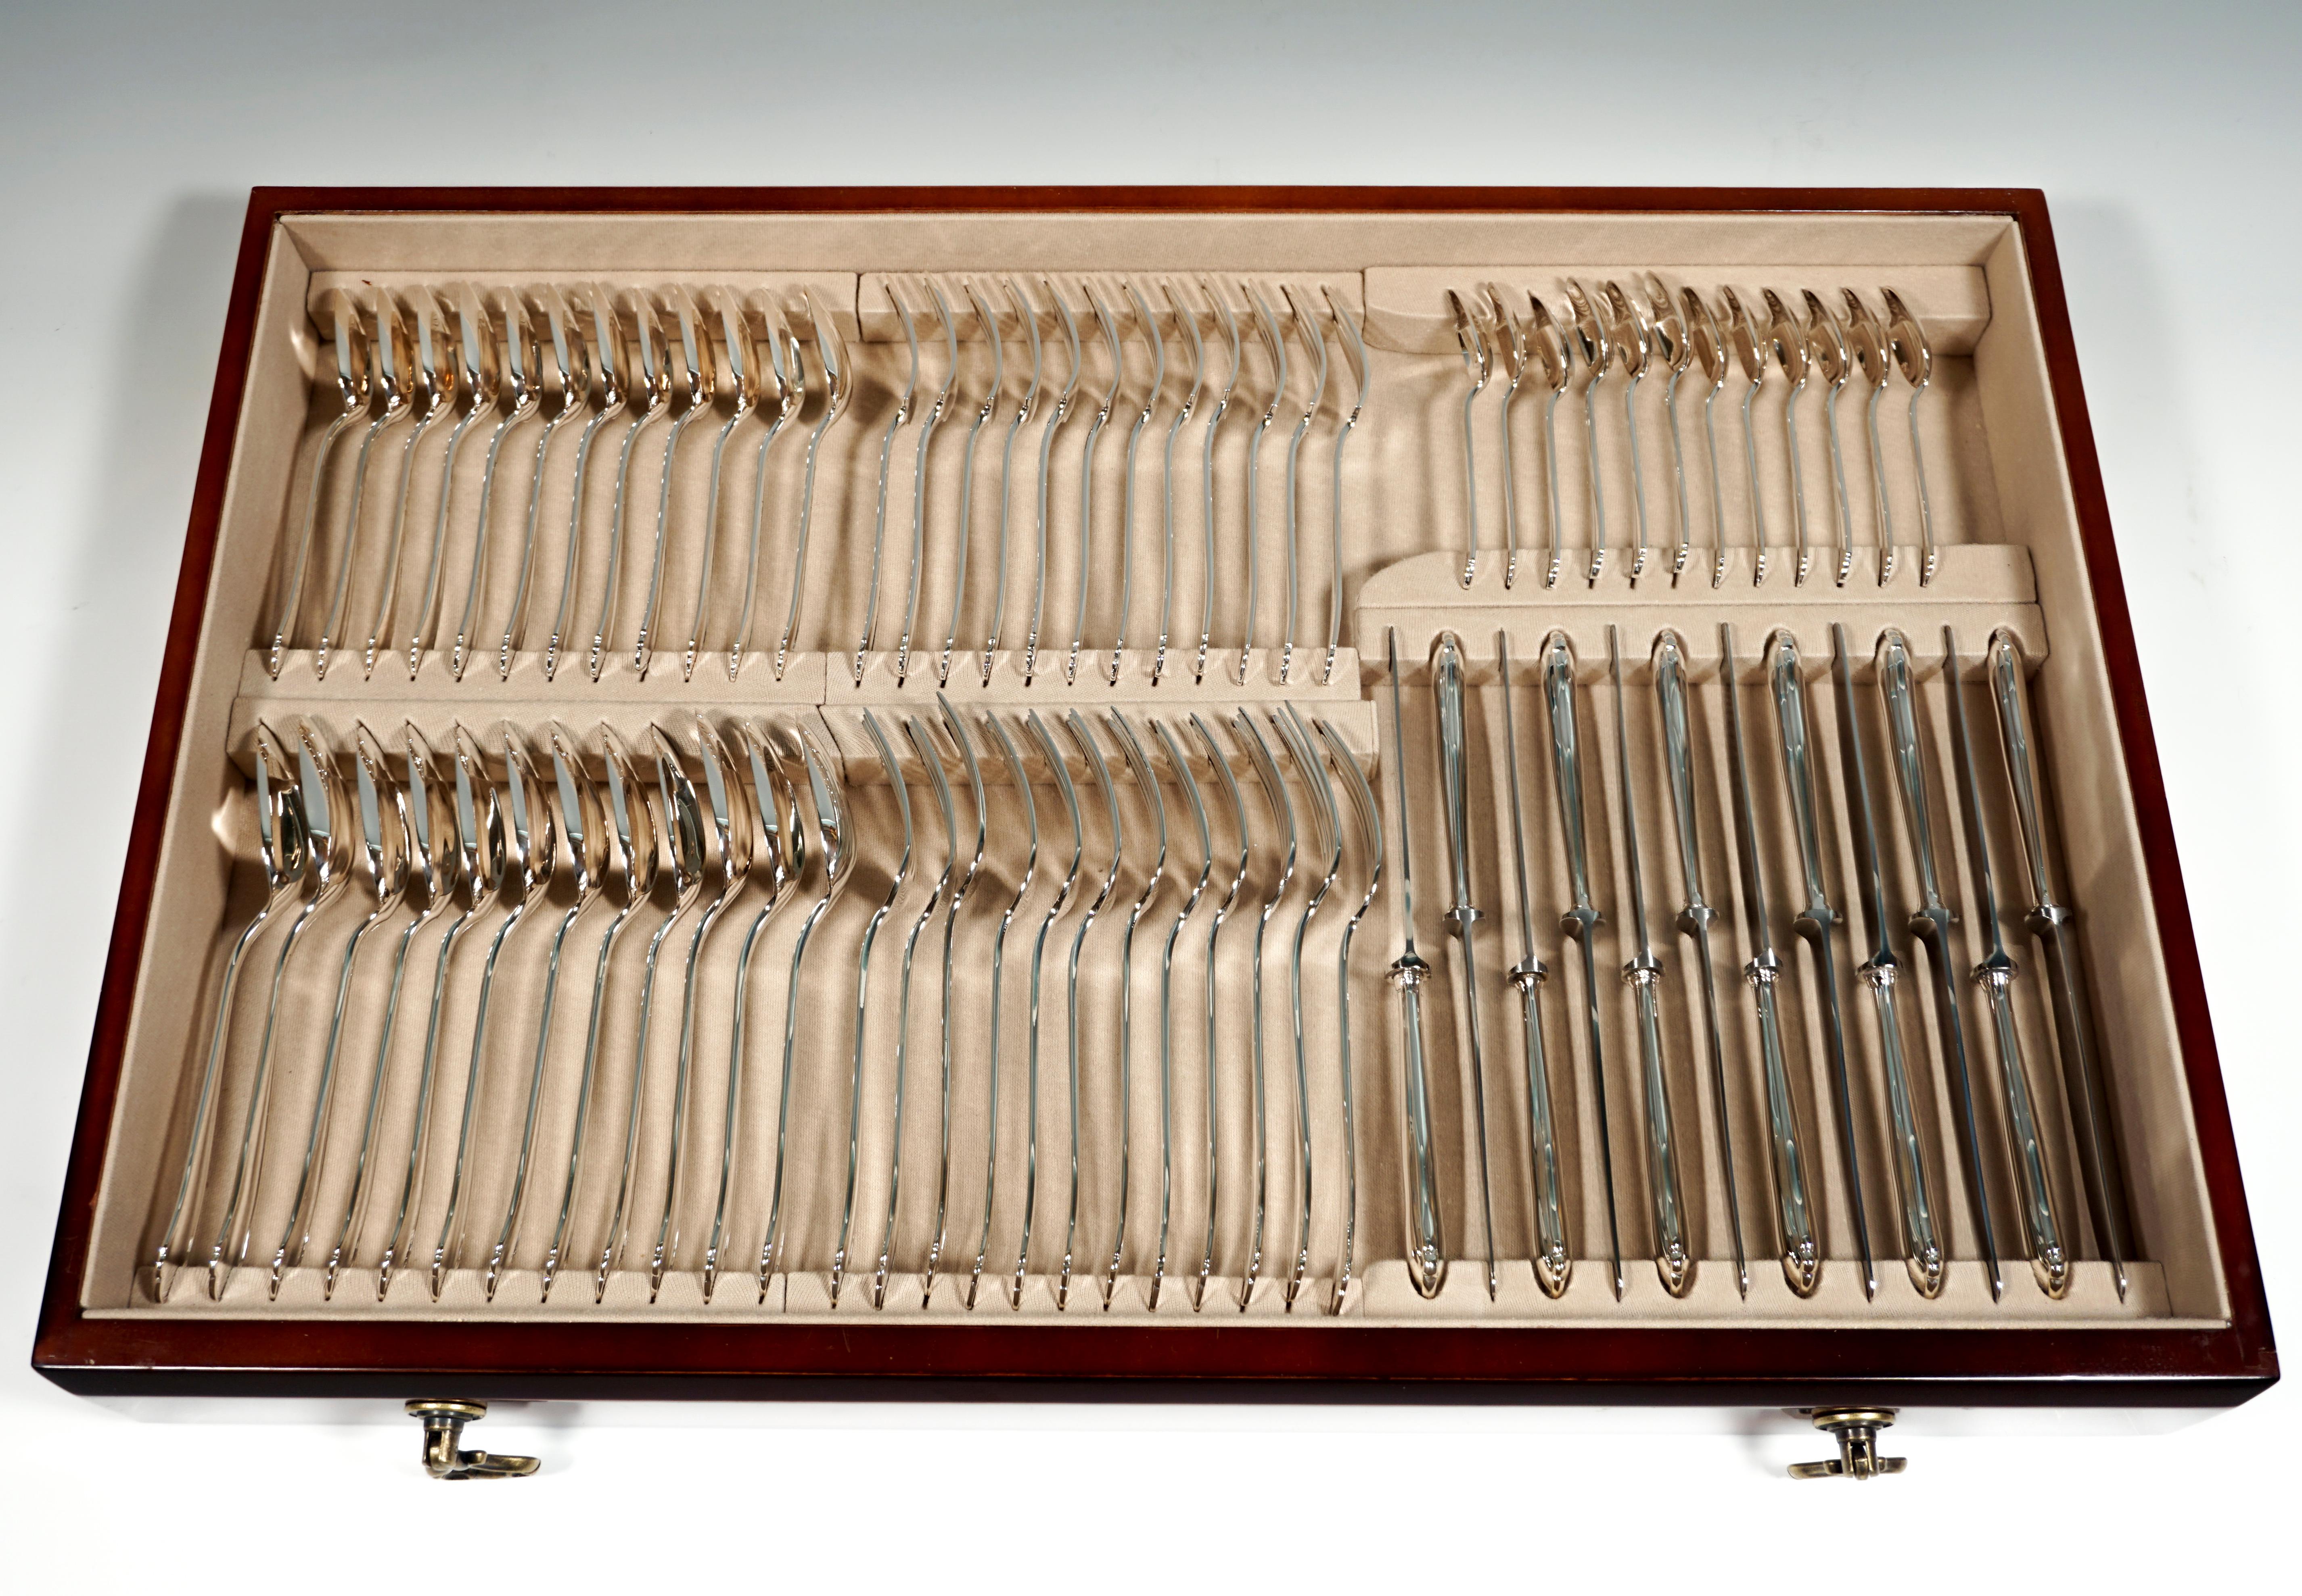 Hand-Crafted Silver Cutlery Set for 12 People in Showcase Vienna Jarosinski & Vaugoin ca 1925 For Sale